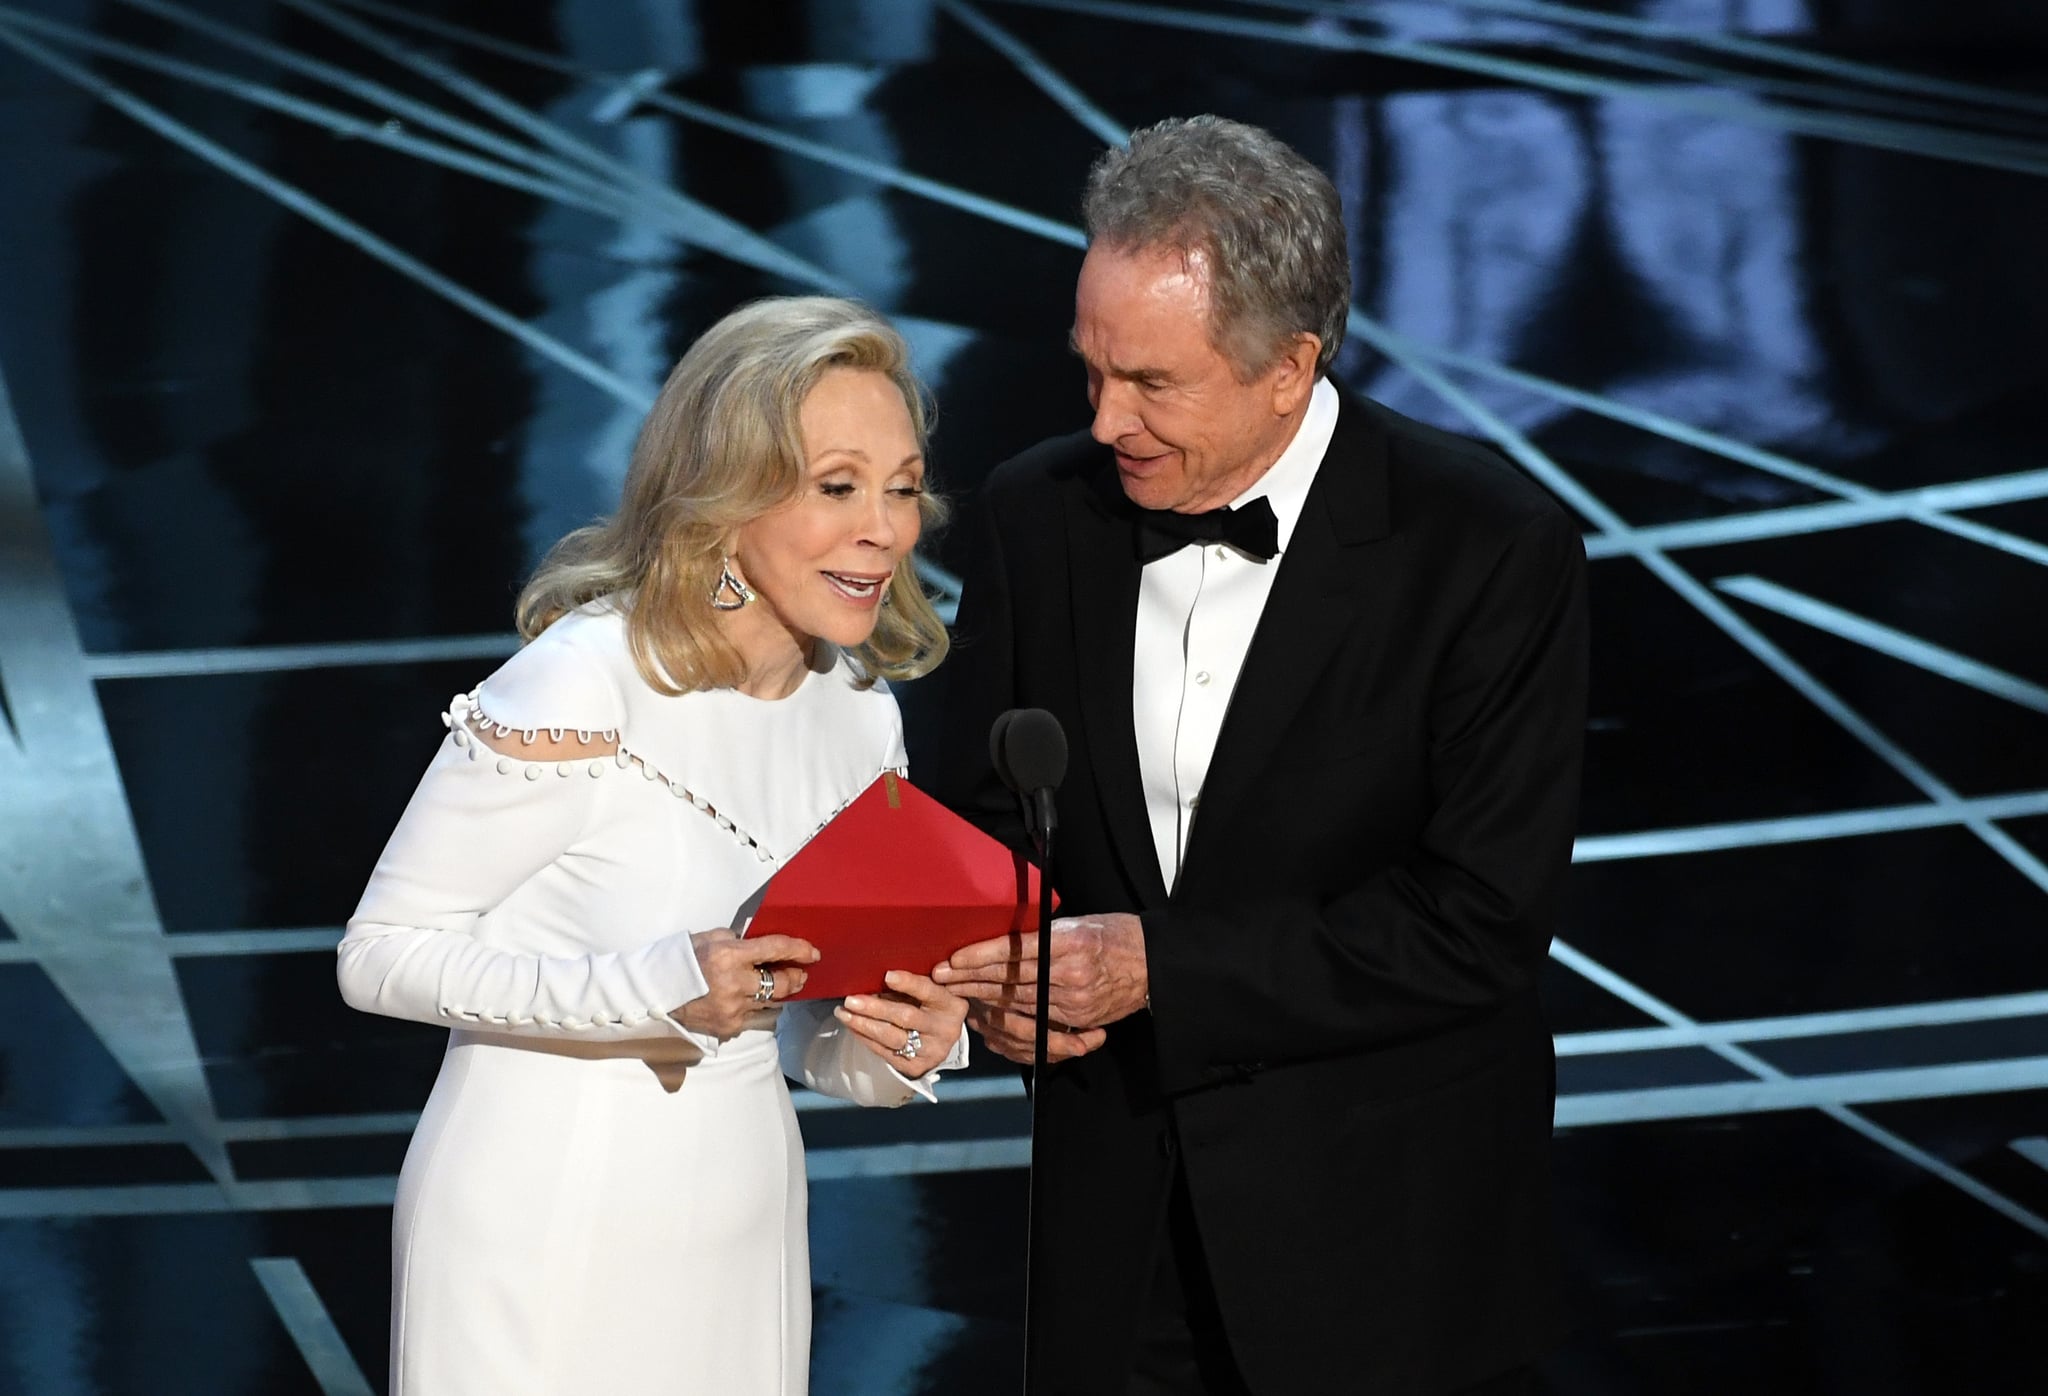 HOLLYWOOD, CA - FEBRUARY 26:  Actors Faye Dunaway (L) and Warren Beatty speak onstage during the 89th Annual Academy Awards at Hollywood & Highland centre on February 26, 2017 in Hollywood, California.  (Photo by Kevin Winter/Getty Images)